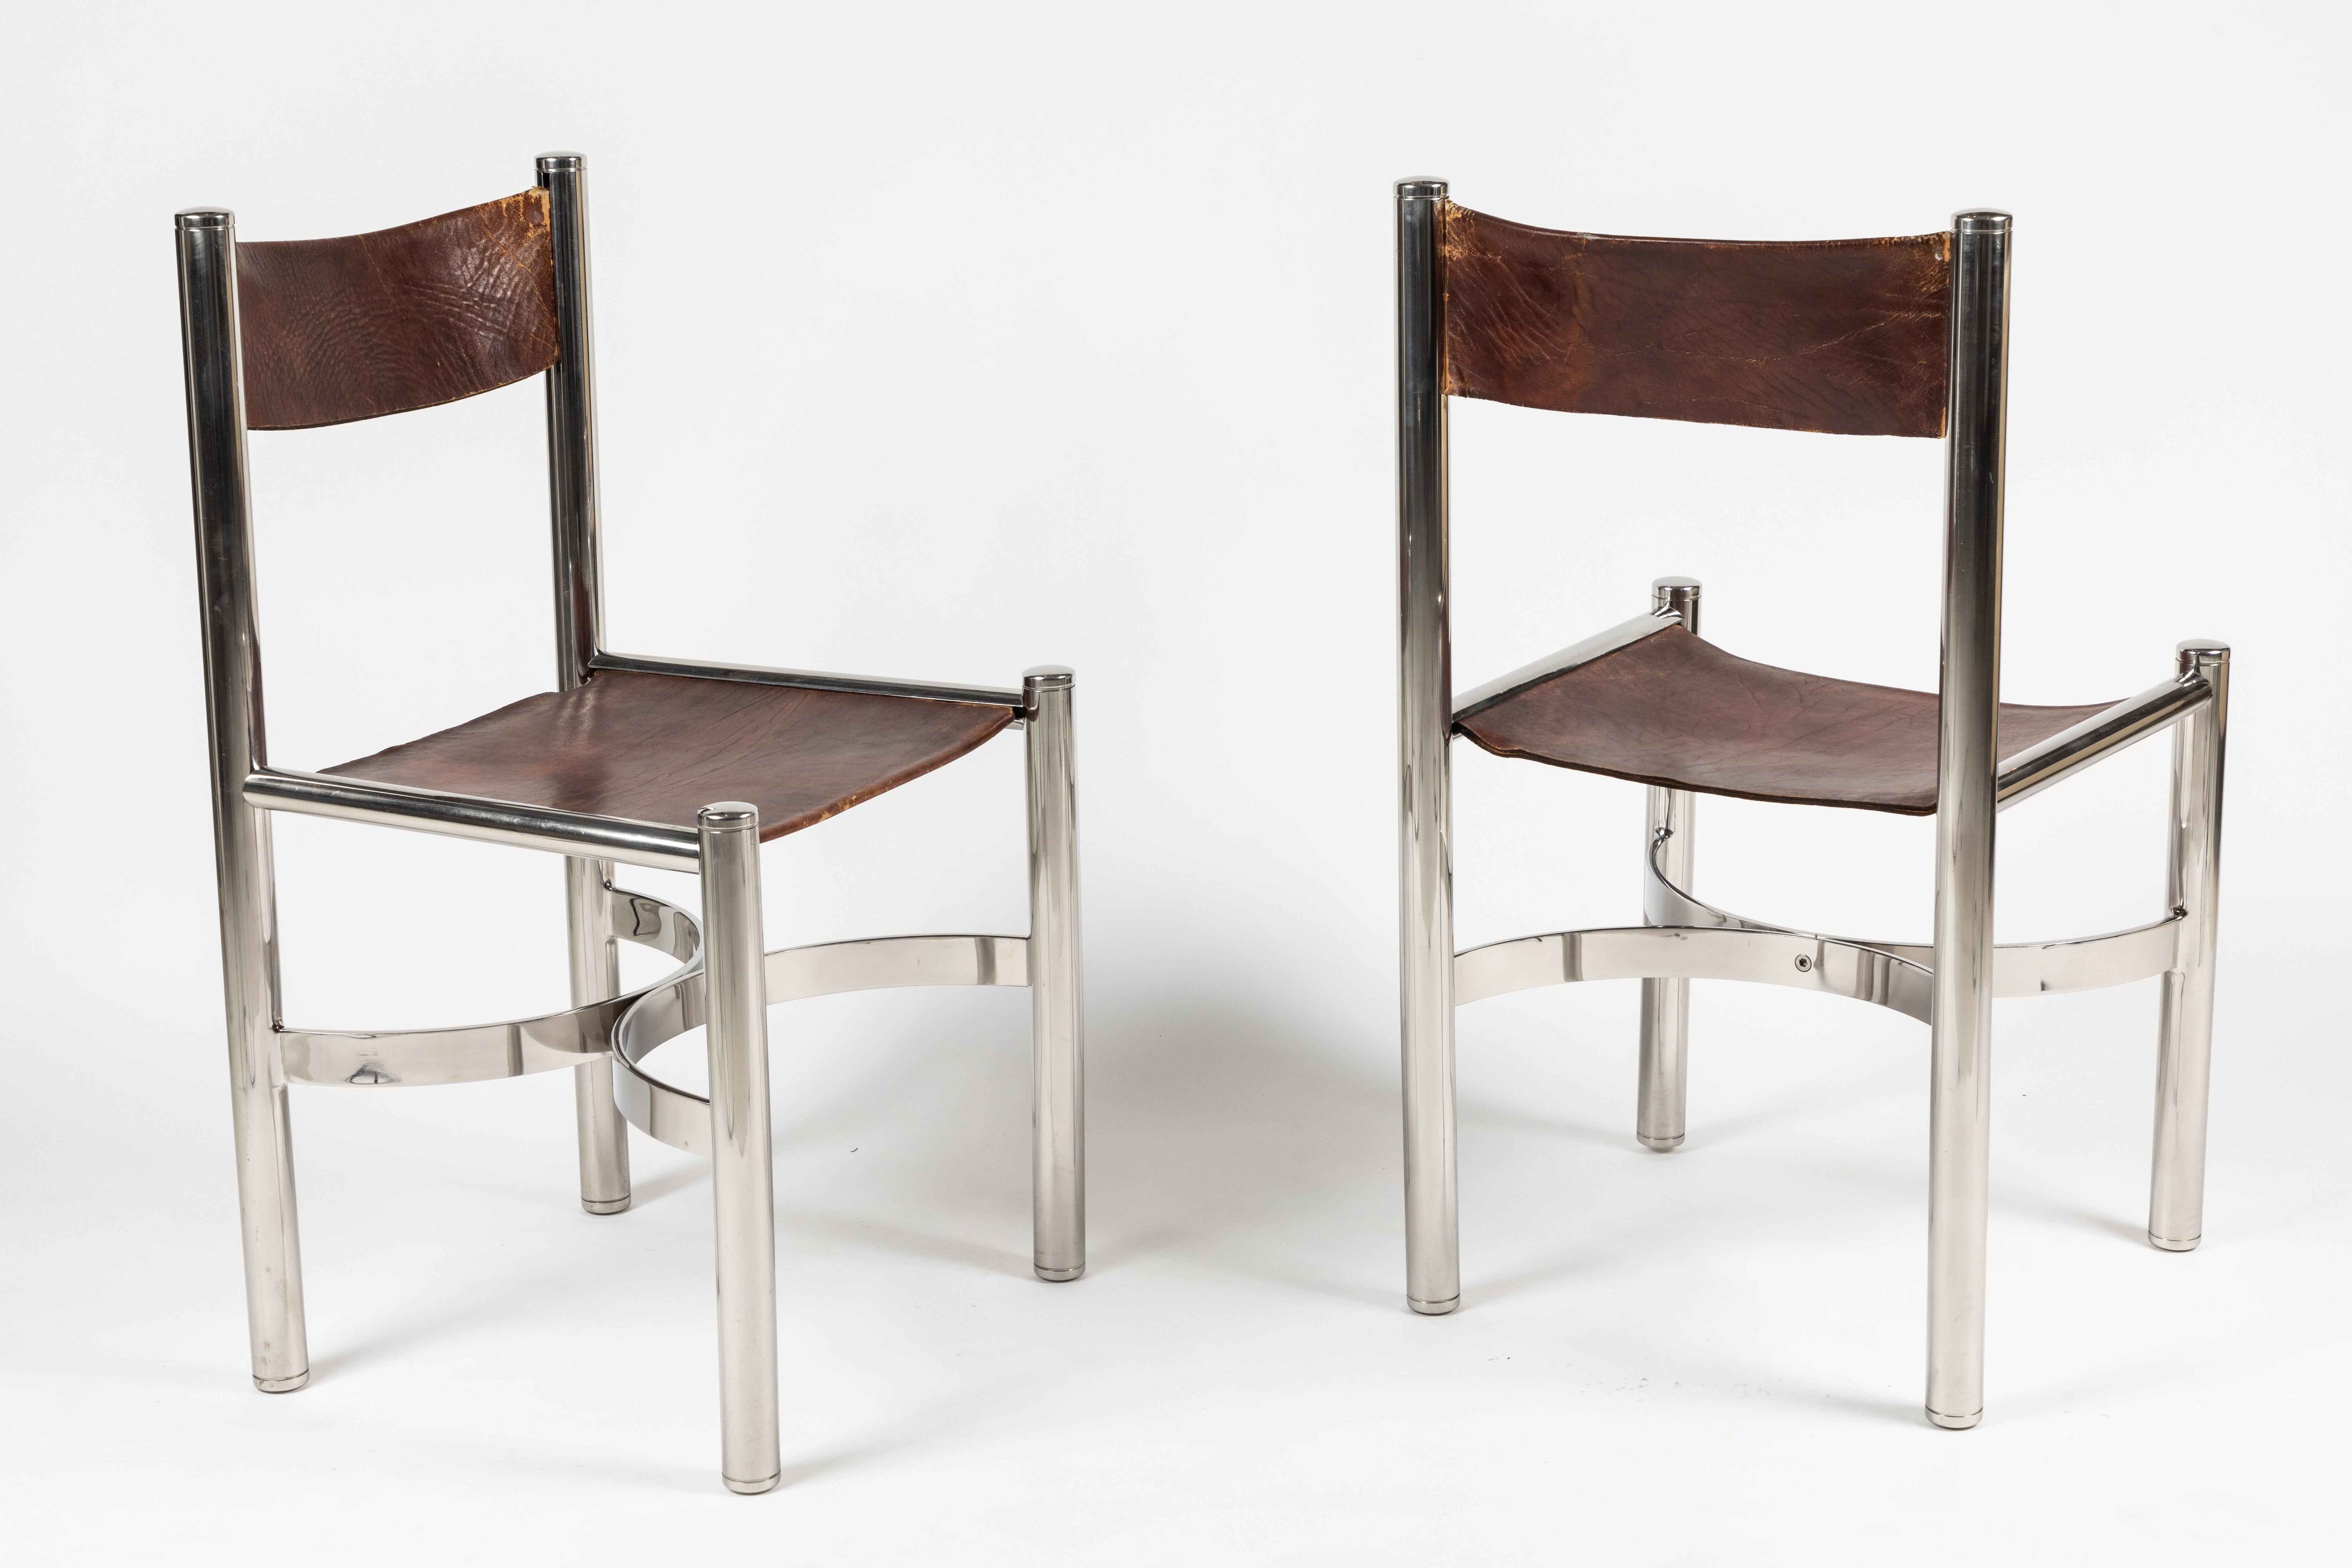 Polished Set of 10 Chrome and Leather Dining Chairs by Dada International